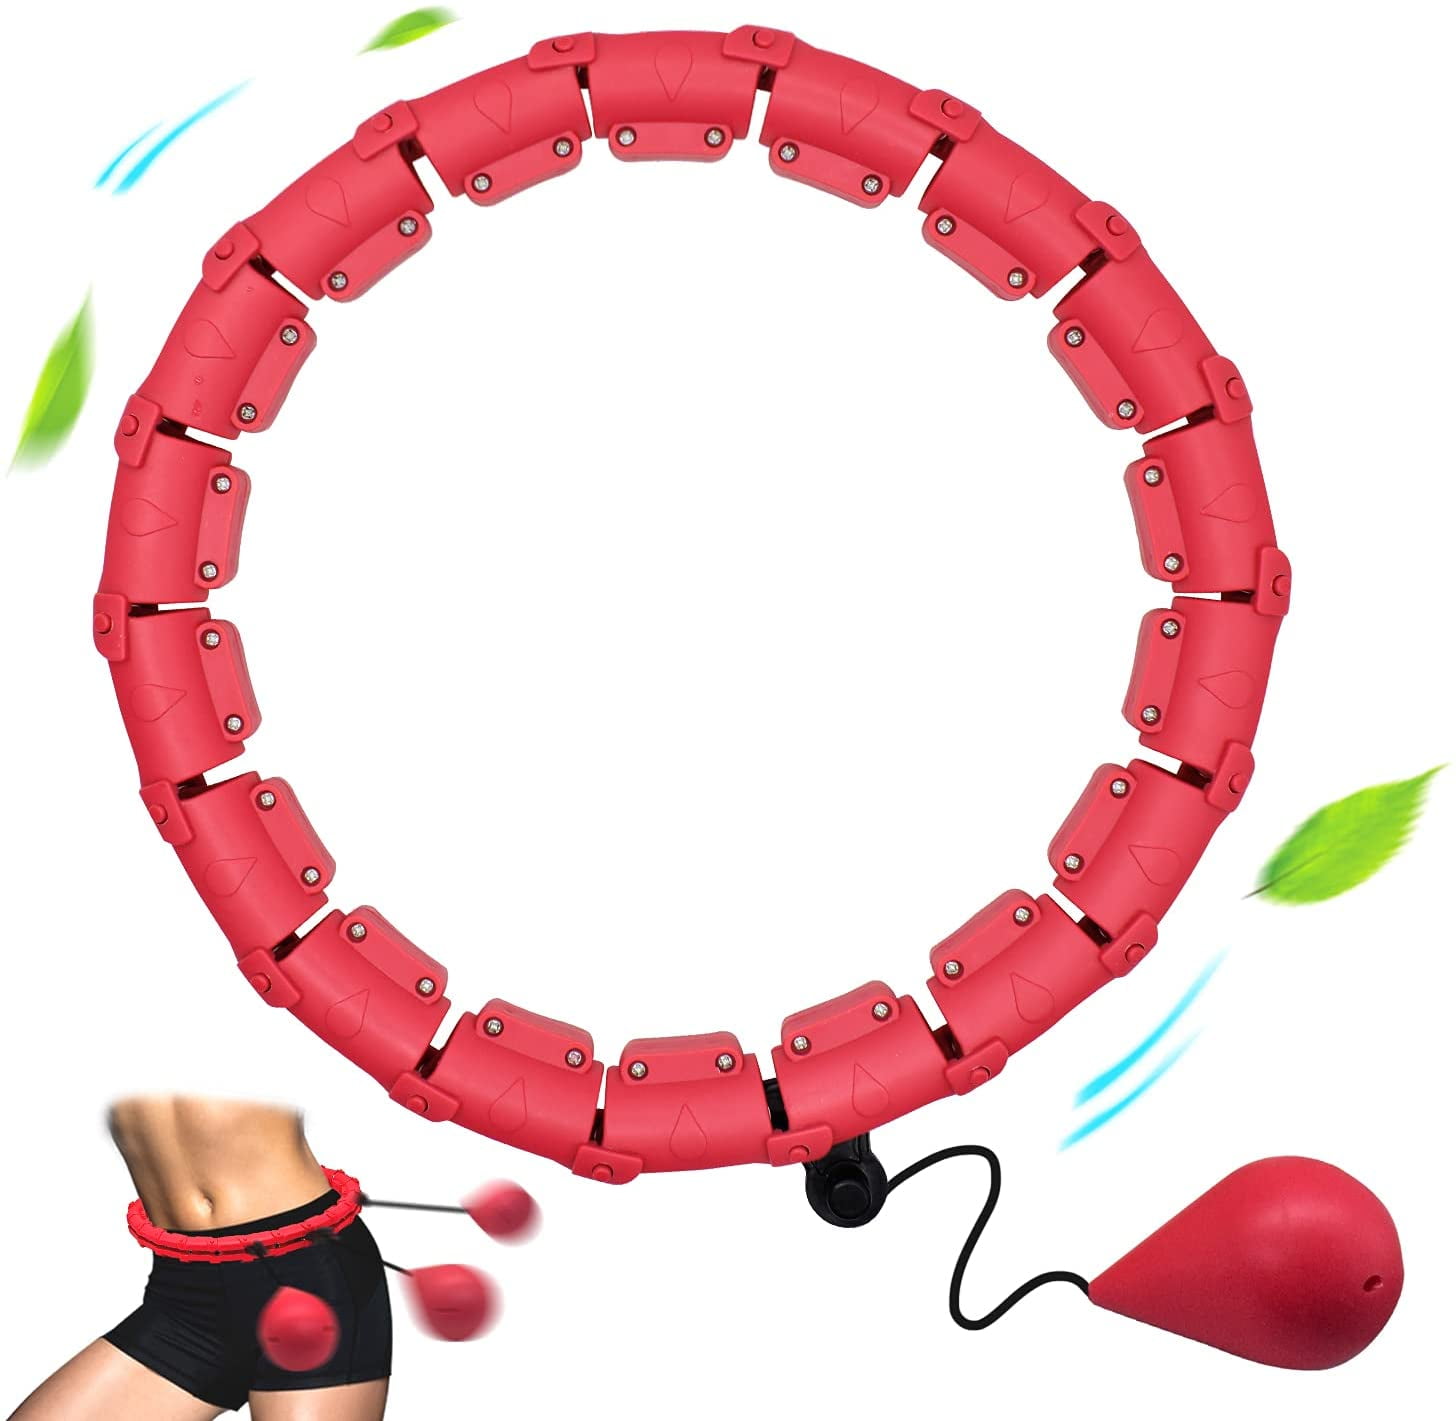 28 Knots Hula Fitness hoop 2 in 1 Abdomen Fitness Massage Suitable for Adults & Kids Smart Weighted Hula Exercise Hoop 